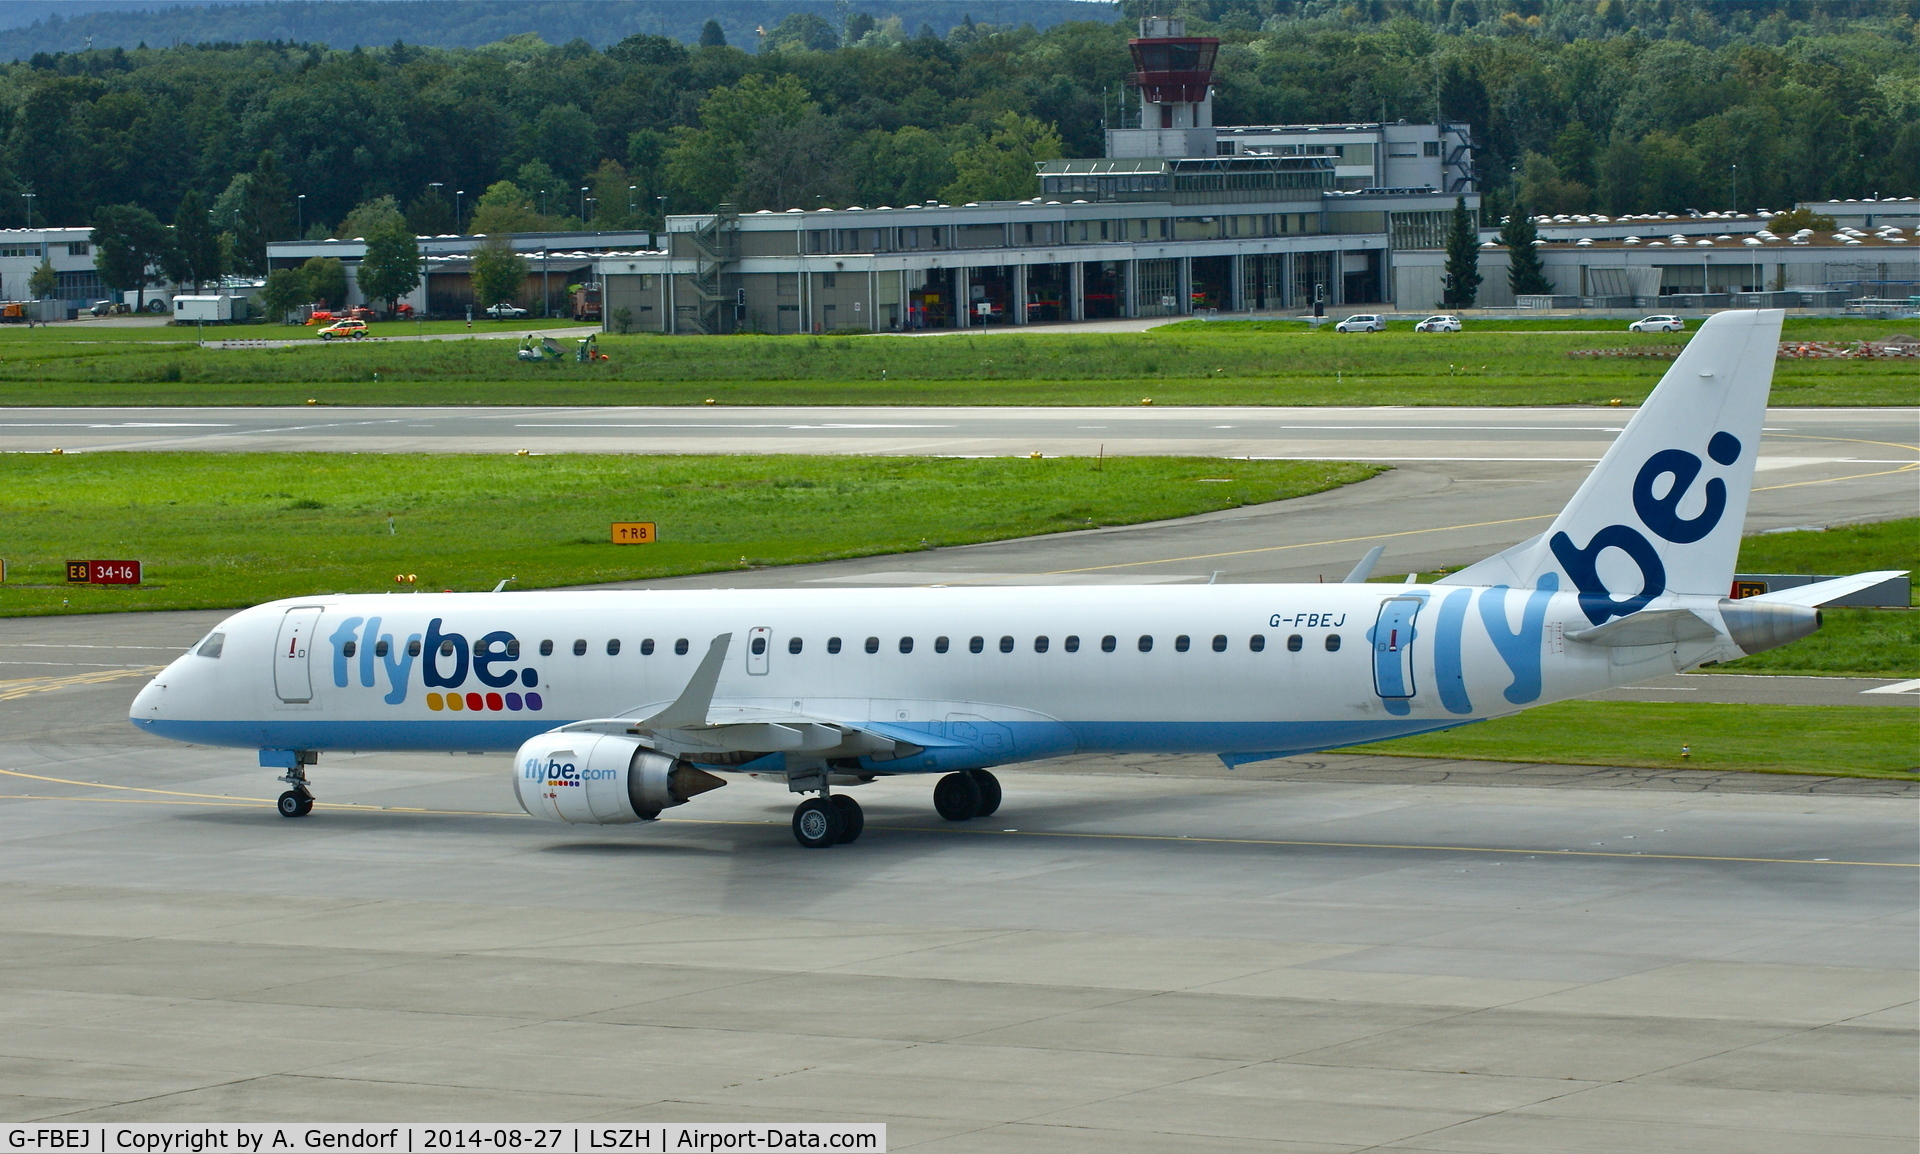 G-FBEJ, 2007 Embraer 195LR (ERJ-190-200LR) C/N 19000155, Helvetic (Flybe cs.), since 2014-07-01 is this jet leased from Flybe, seen here at it's new homebase Zürich-Kloten(LSZH)